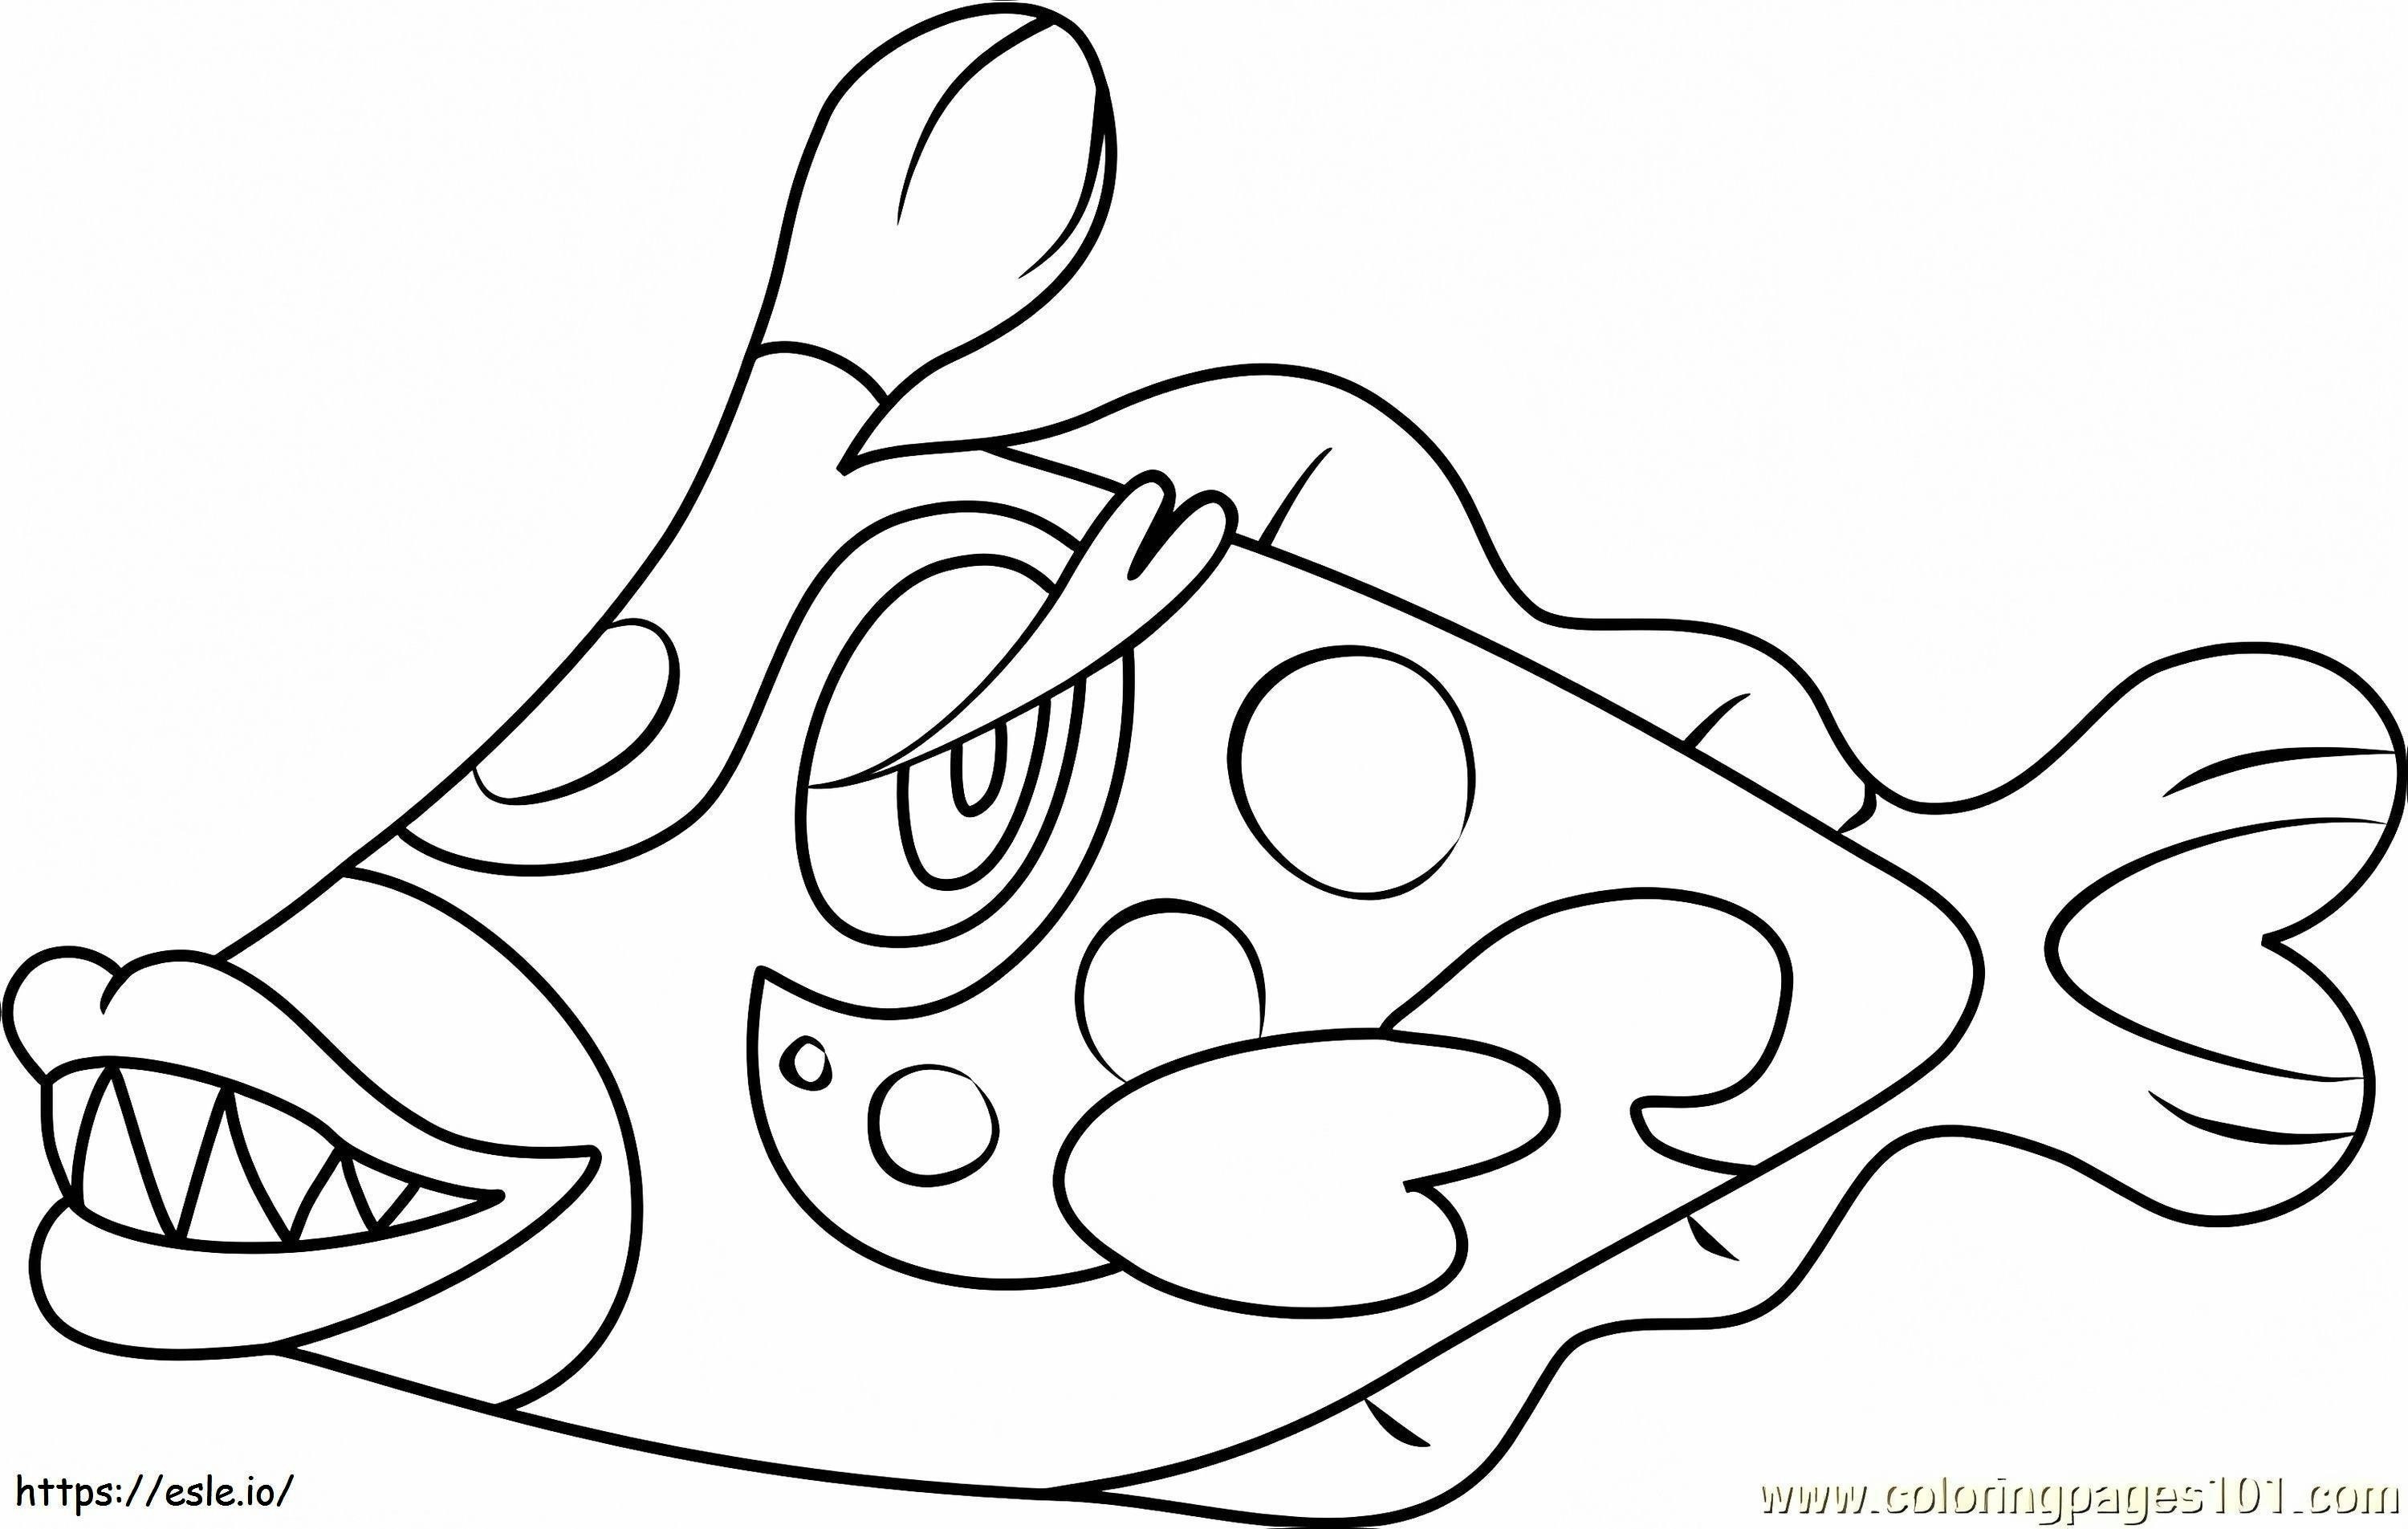 1529608481 16 coloring page